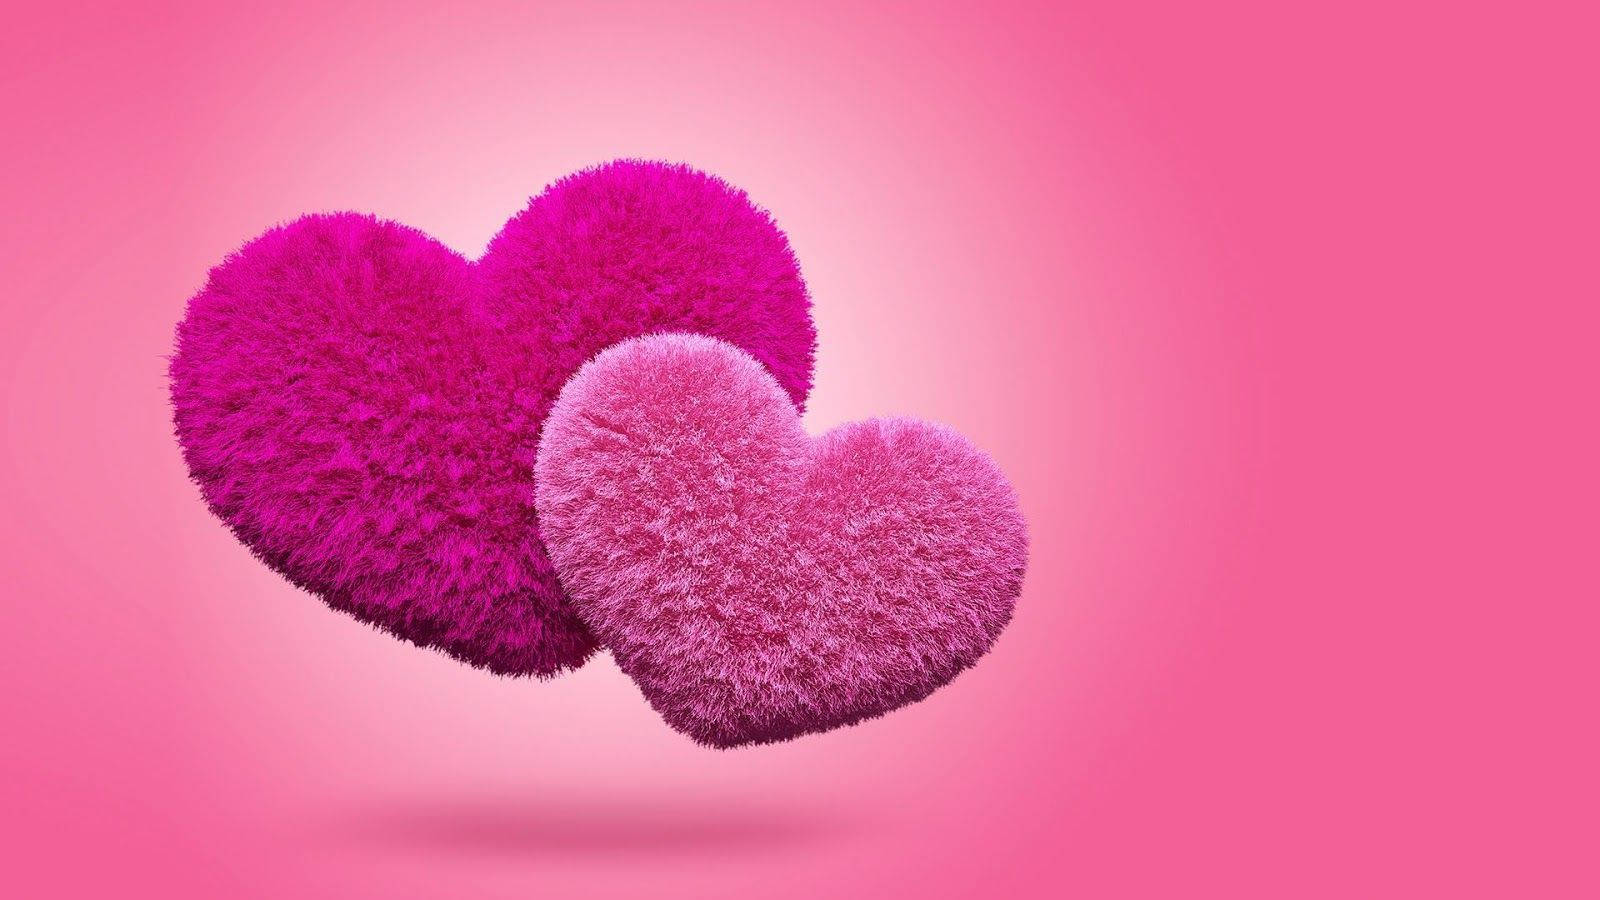 Cute Heart With Fur Pink Aesthetic